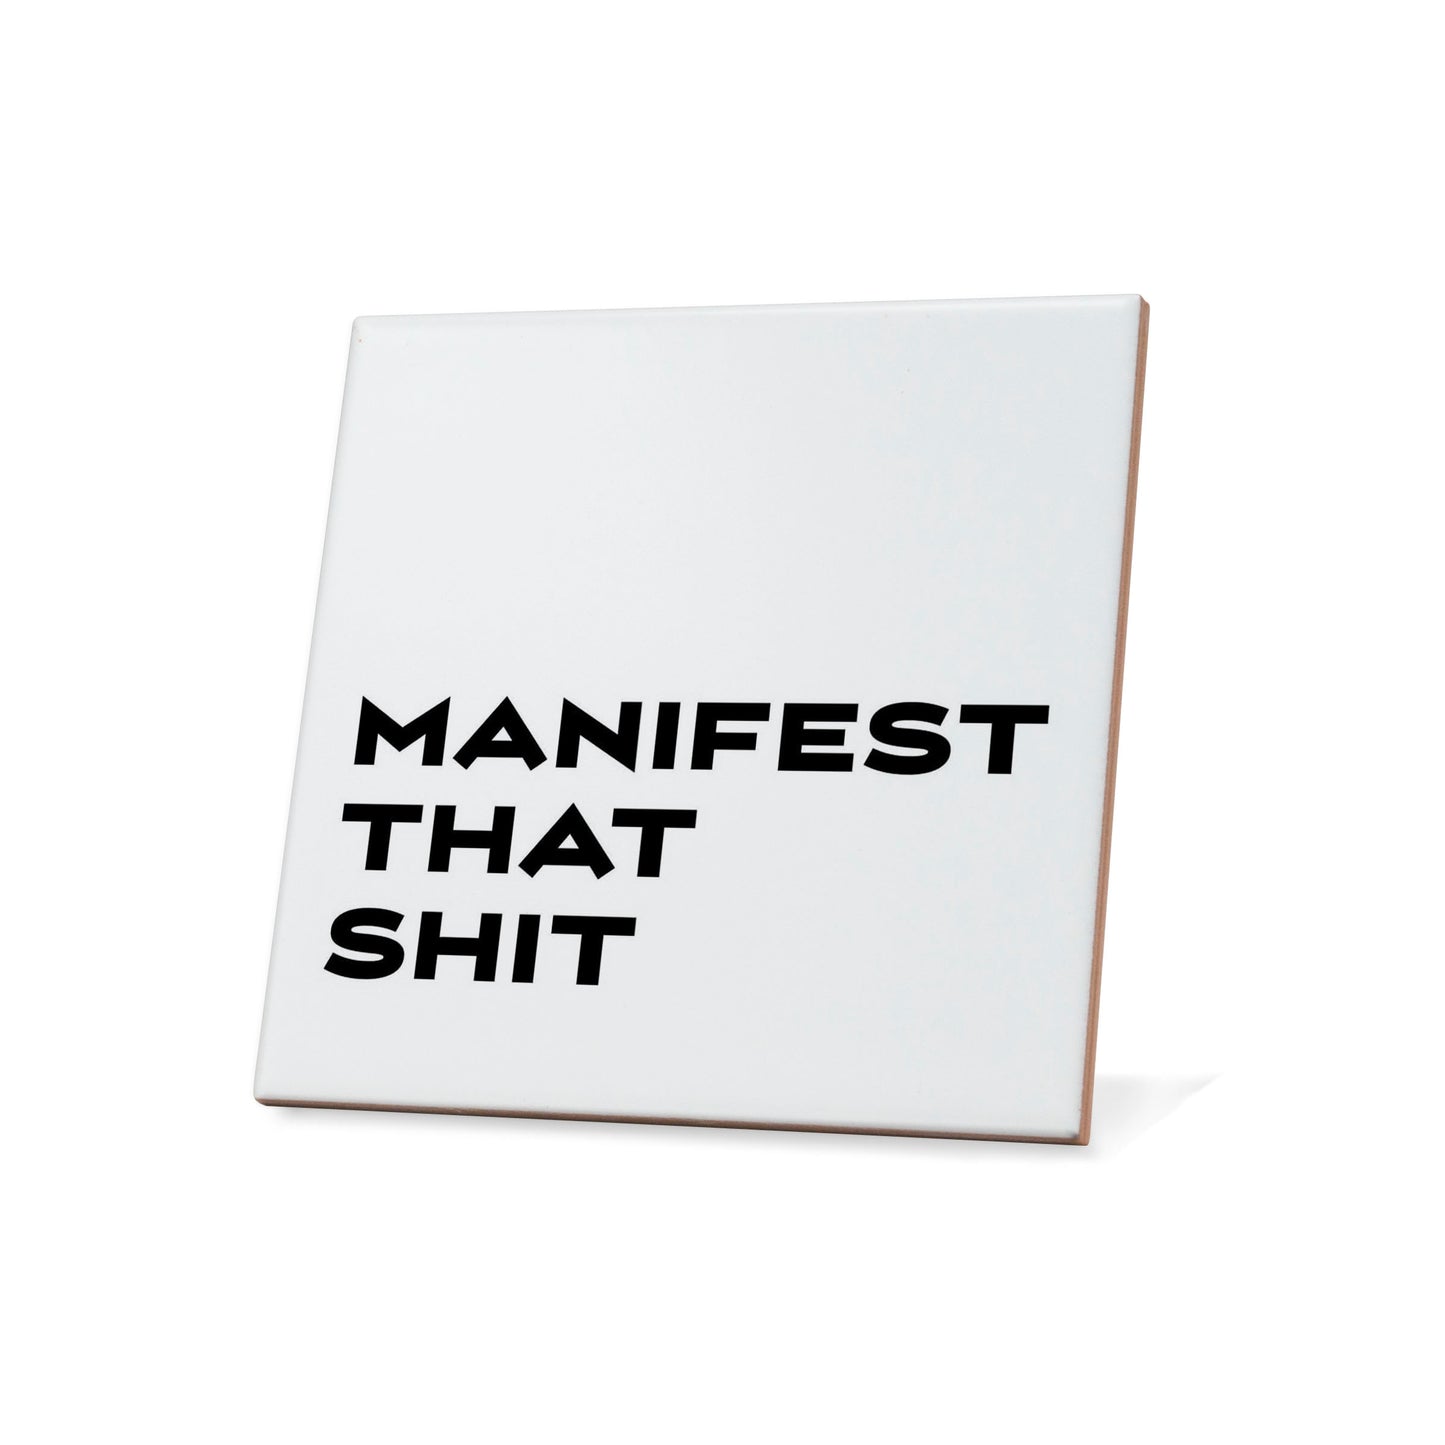 Manifest that shit Quote Coaster